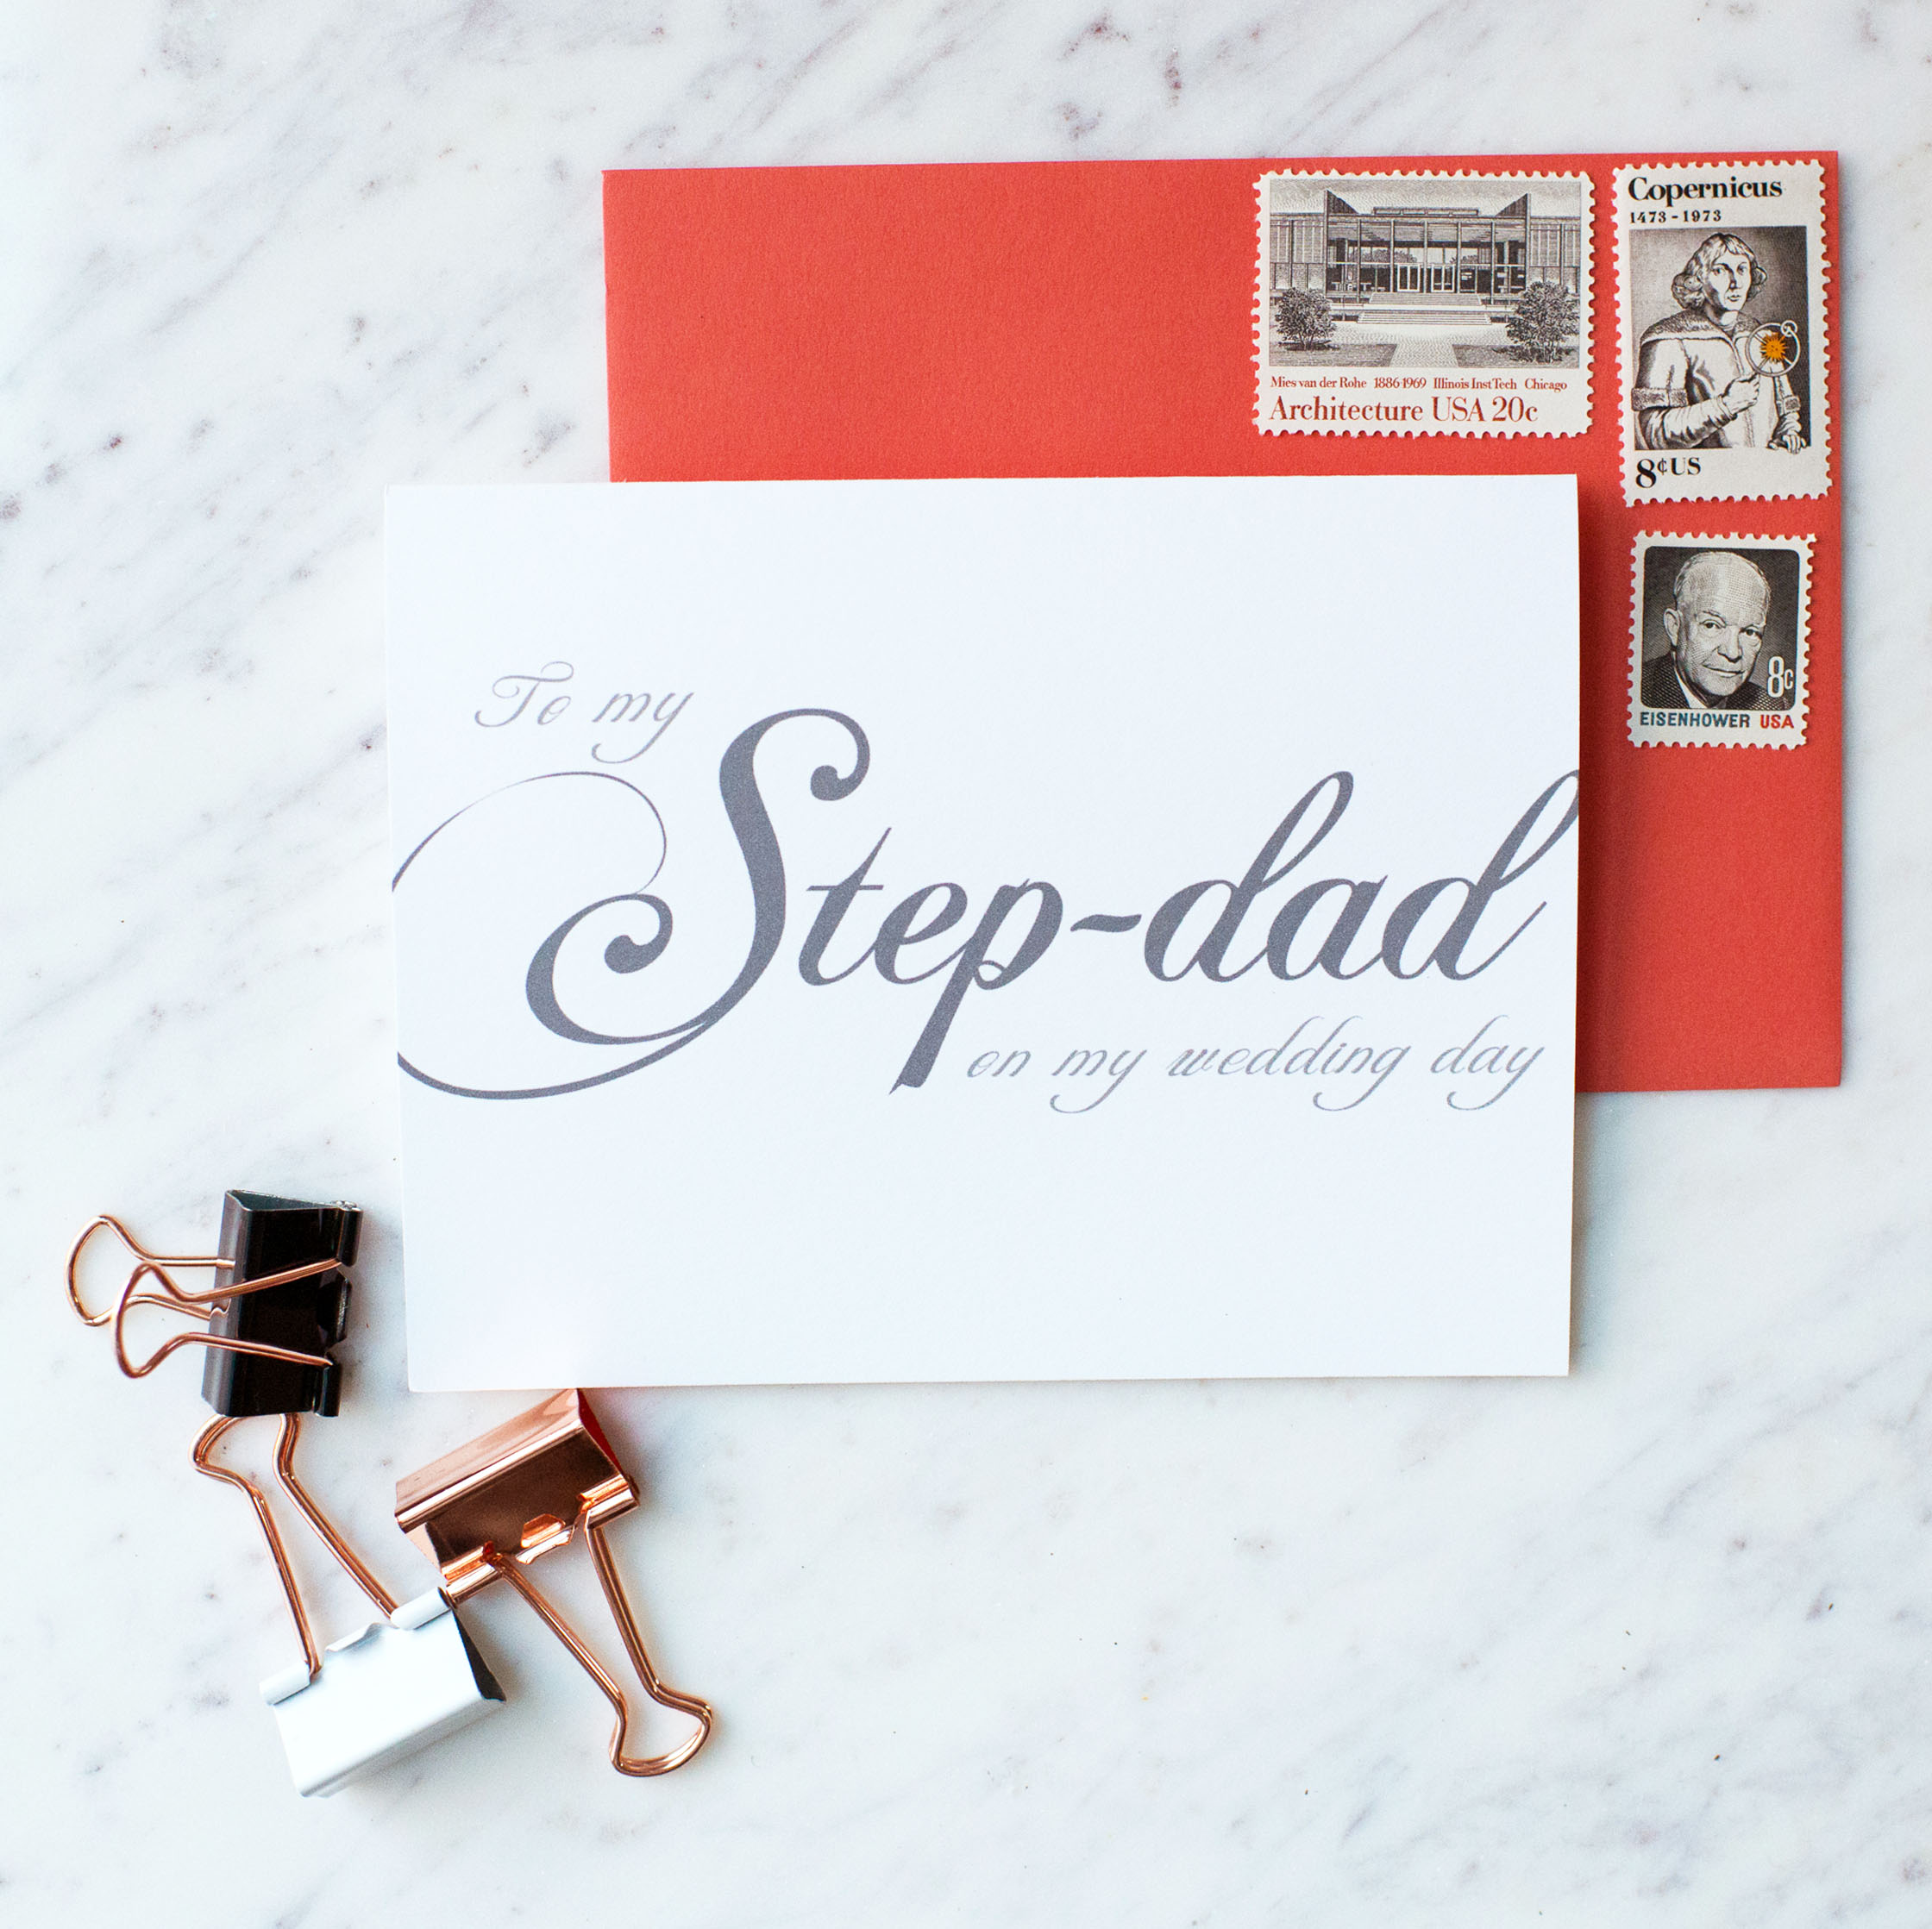 To My Step-Dad On My Wedding Day Card